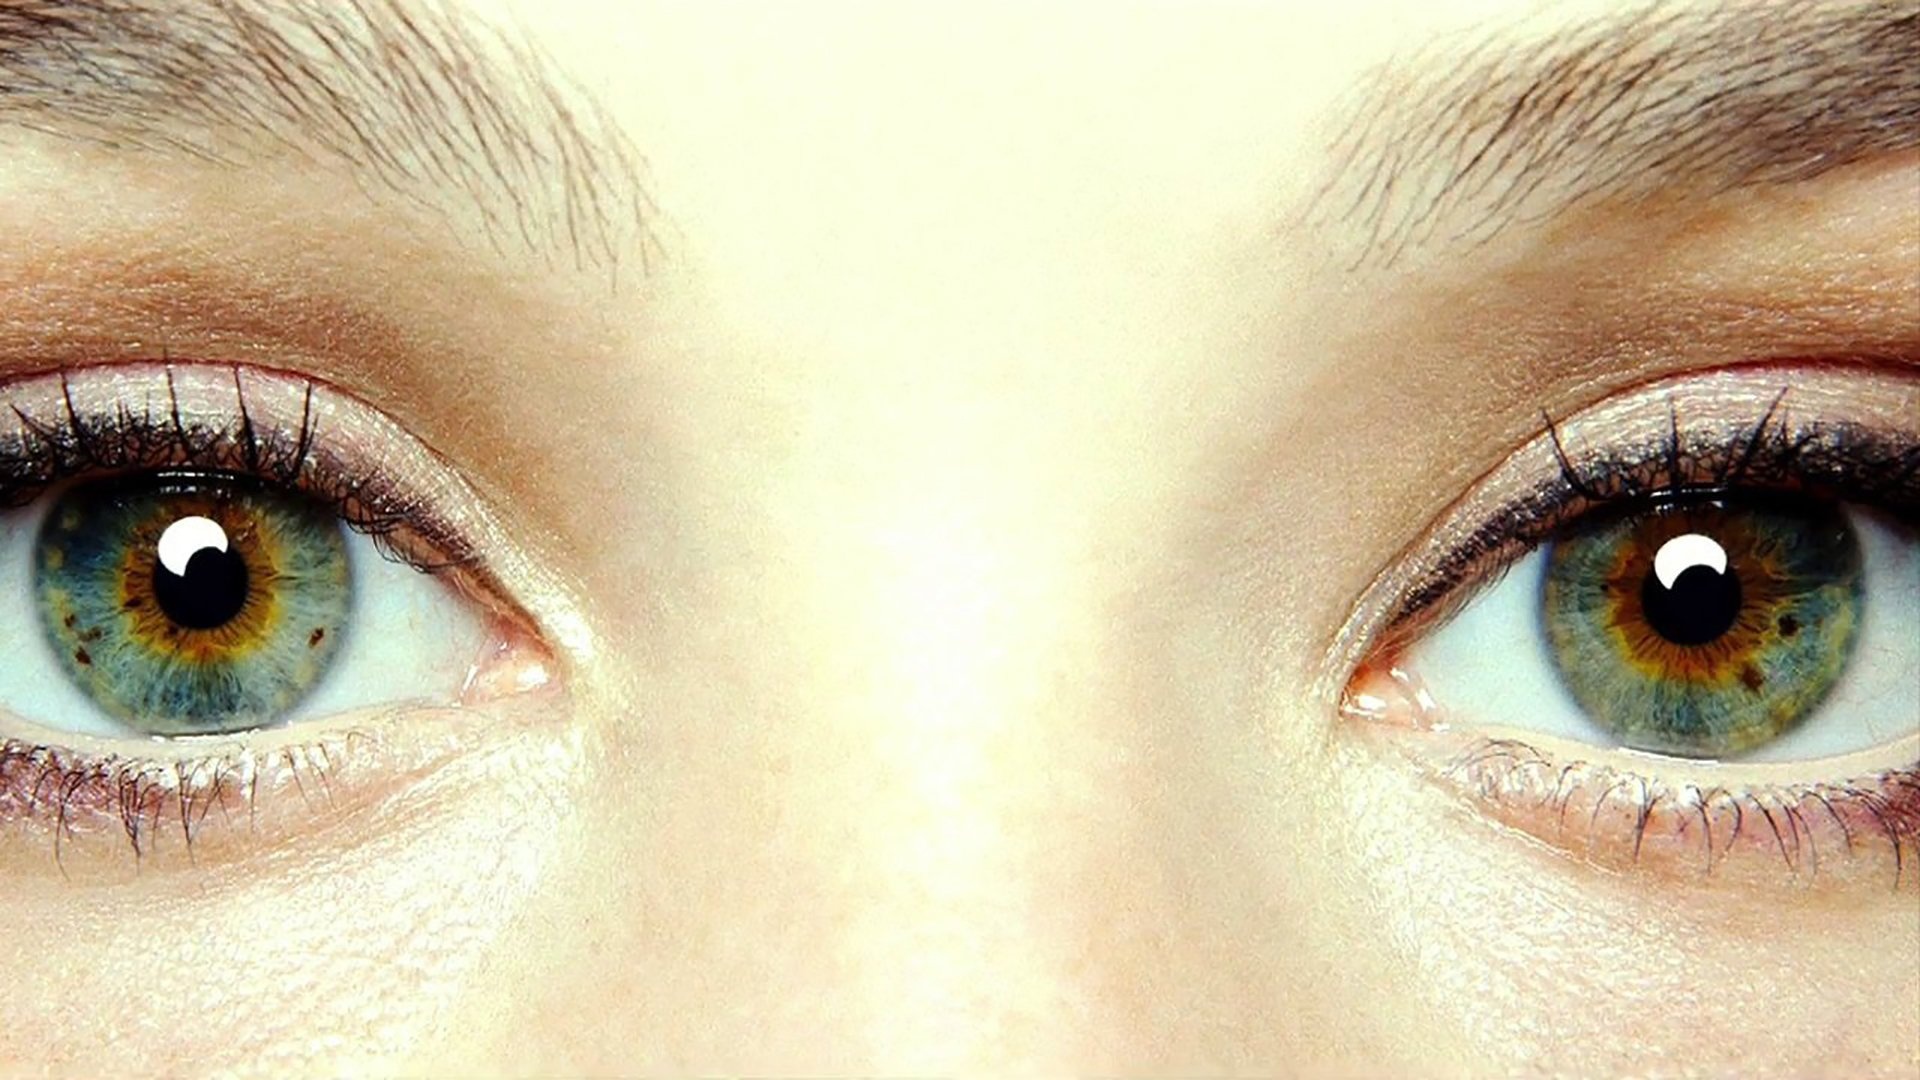 I Origins, Thought-provoking, Scientific exploration, Existential questions, 1920x1080 Full HD Desktop